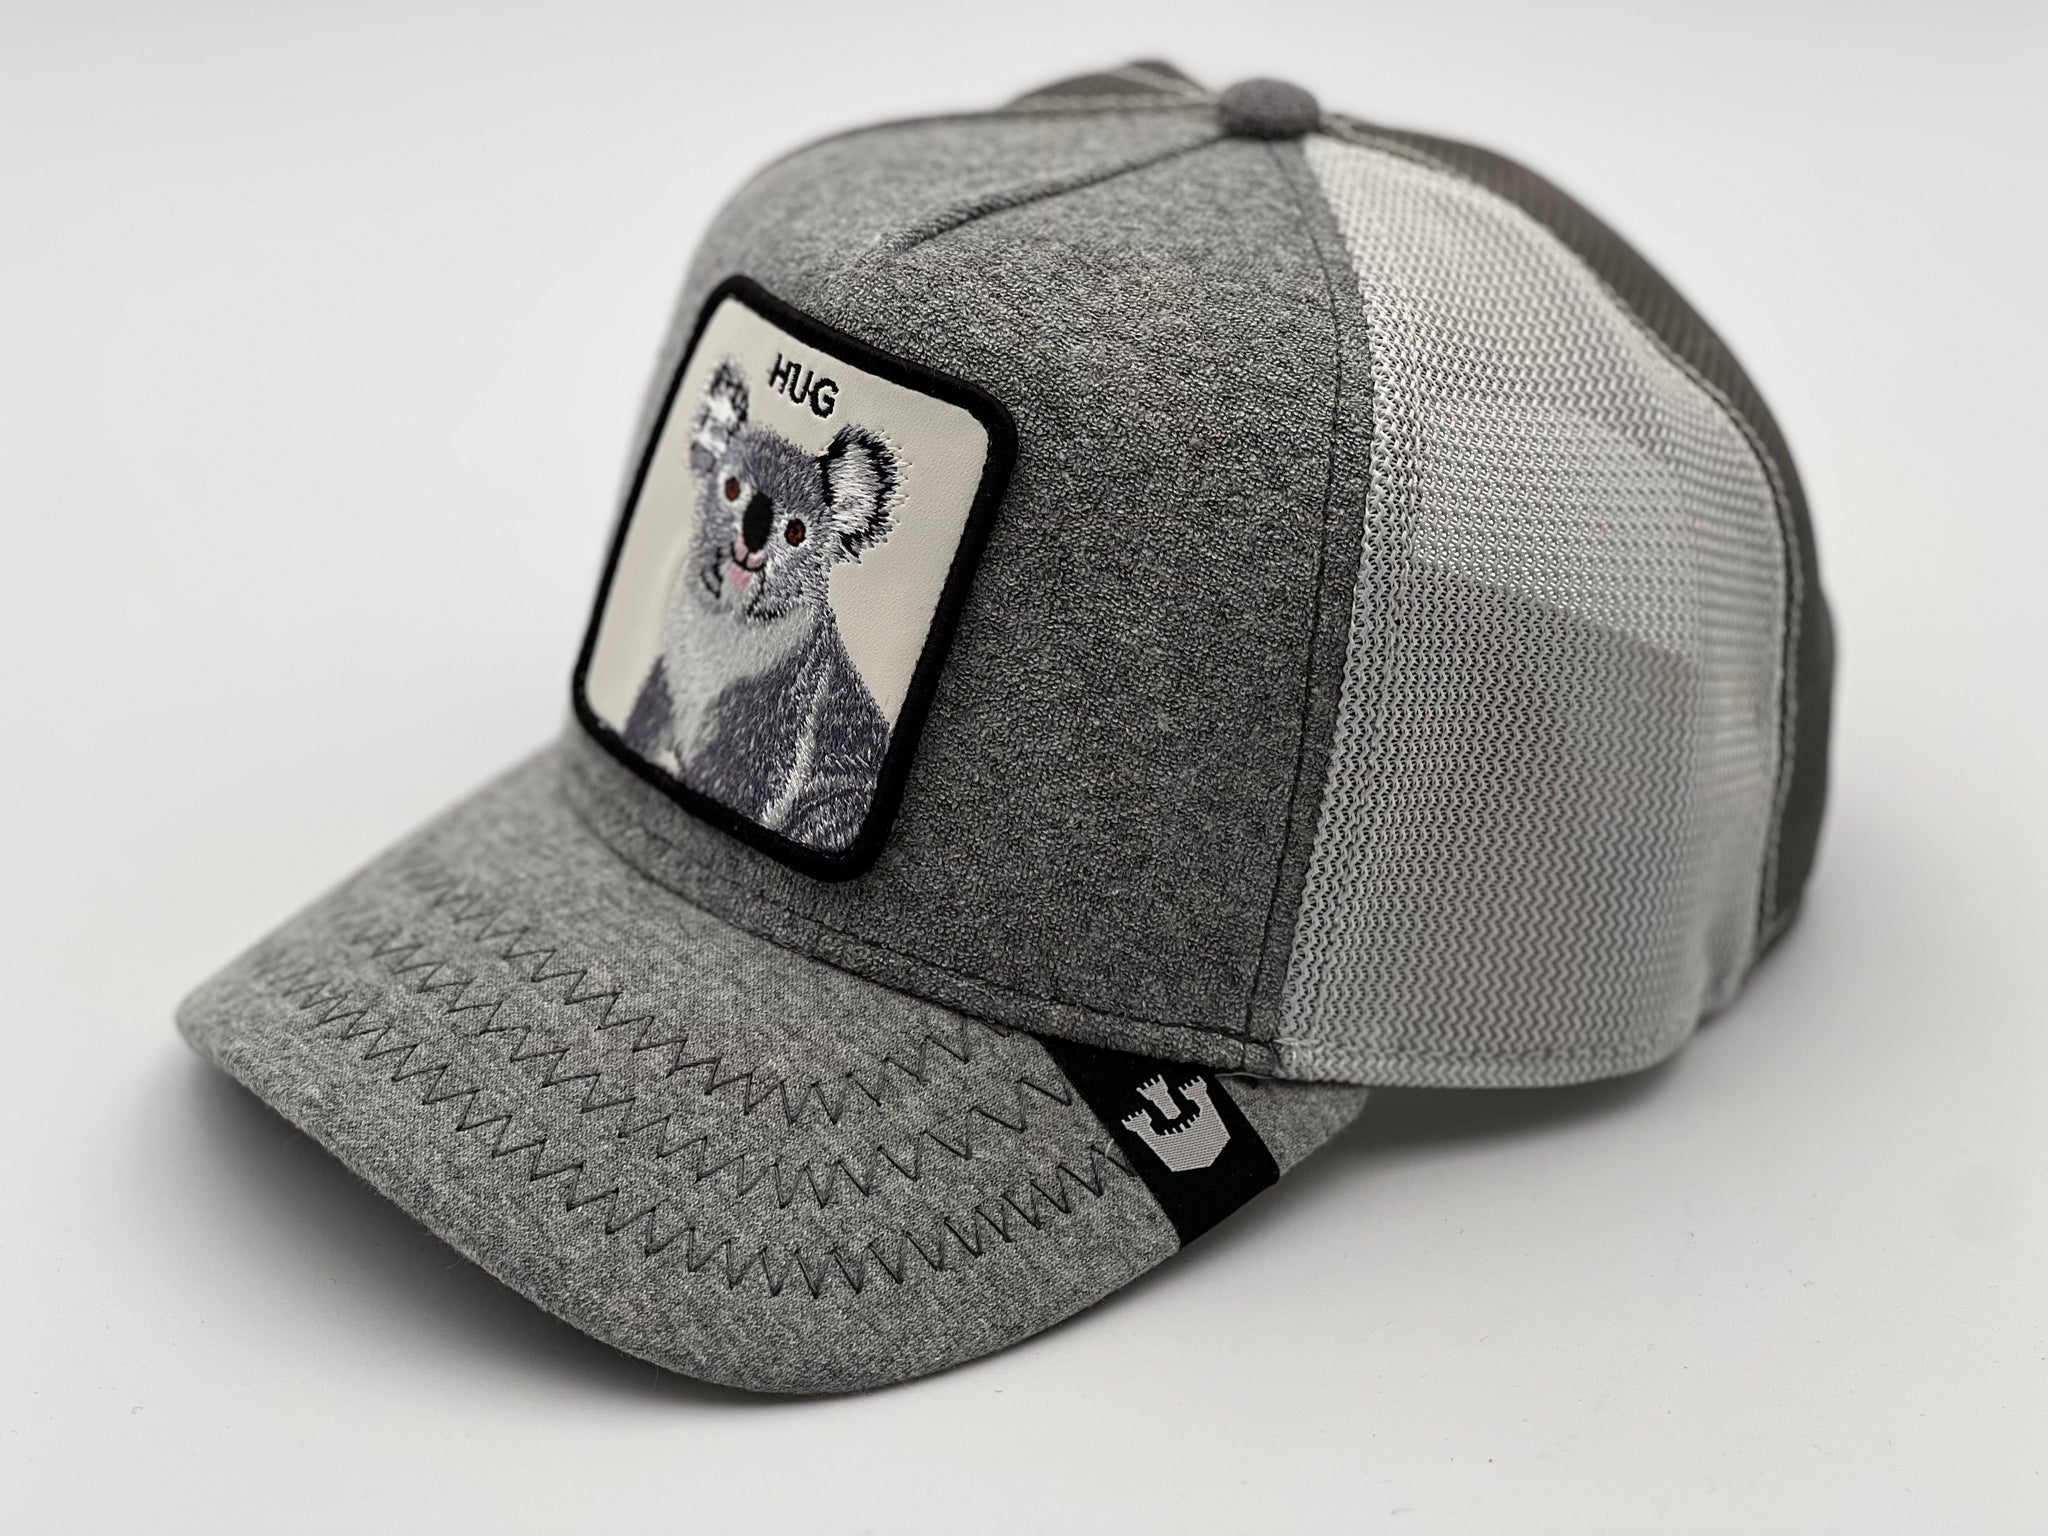 Goorin The Farm trucker cap collection - Mister Nice Guy Grey 1010352-GRY One Size